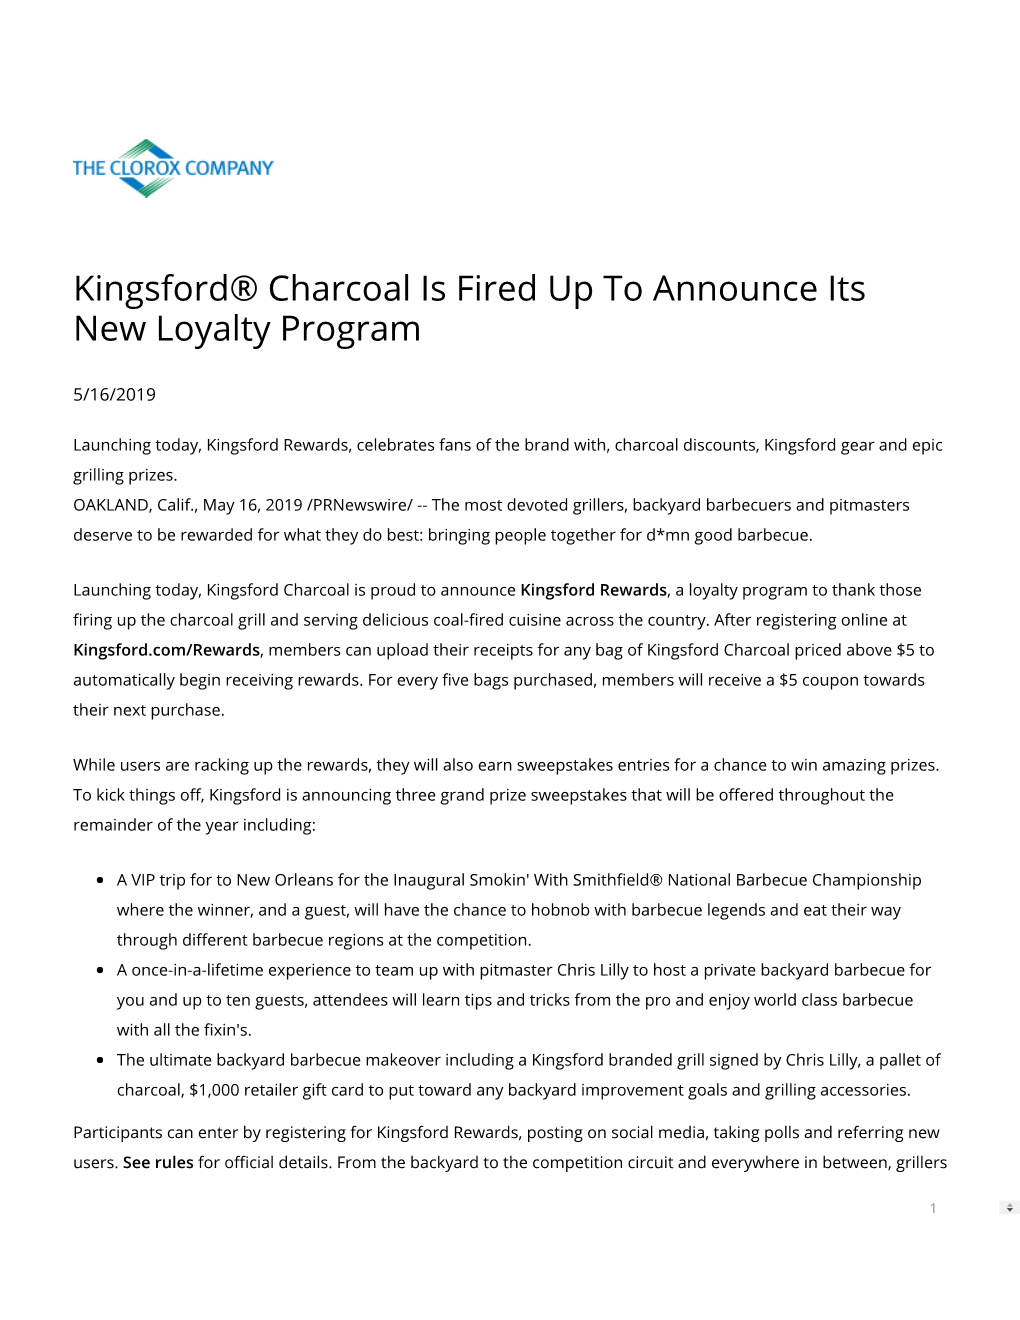 Kingsford® Charcoal Is Fired up to Announce Its New Loyalty Program